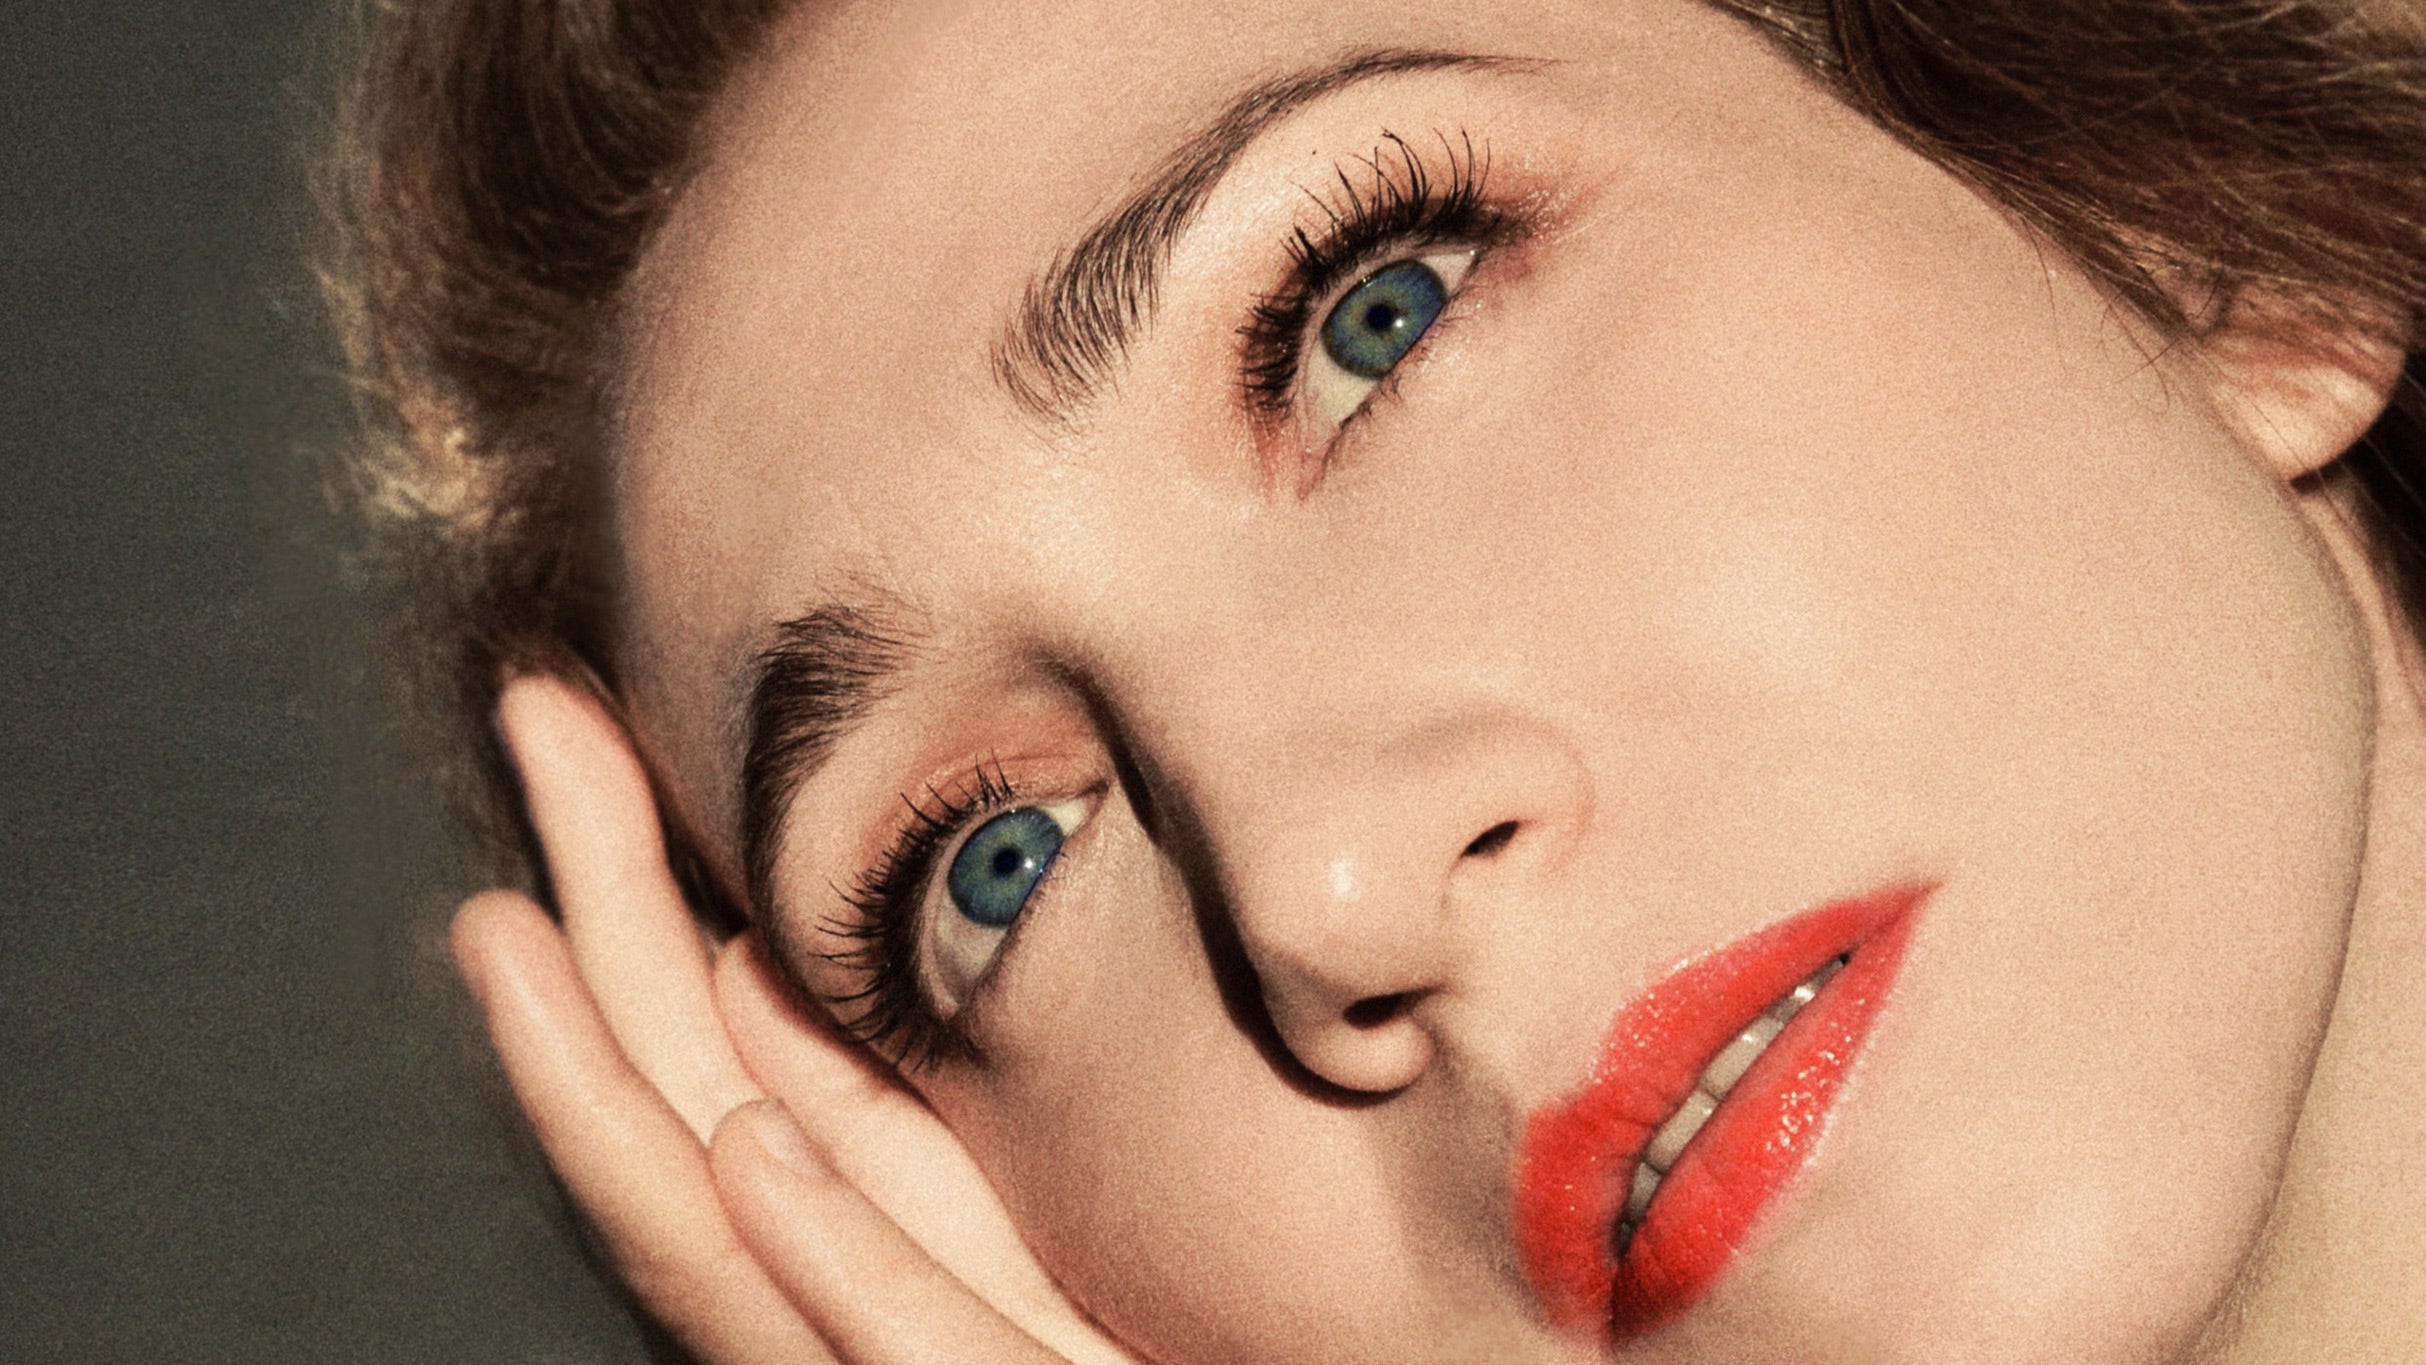 working presale password for An Evening With Regina Spektor affordable tickets in Stamford at Palace Theatre Stamford